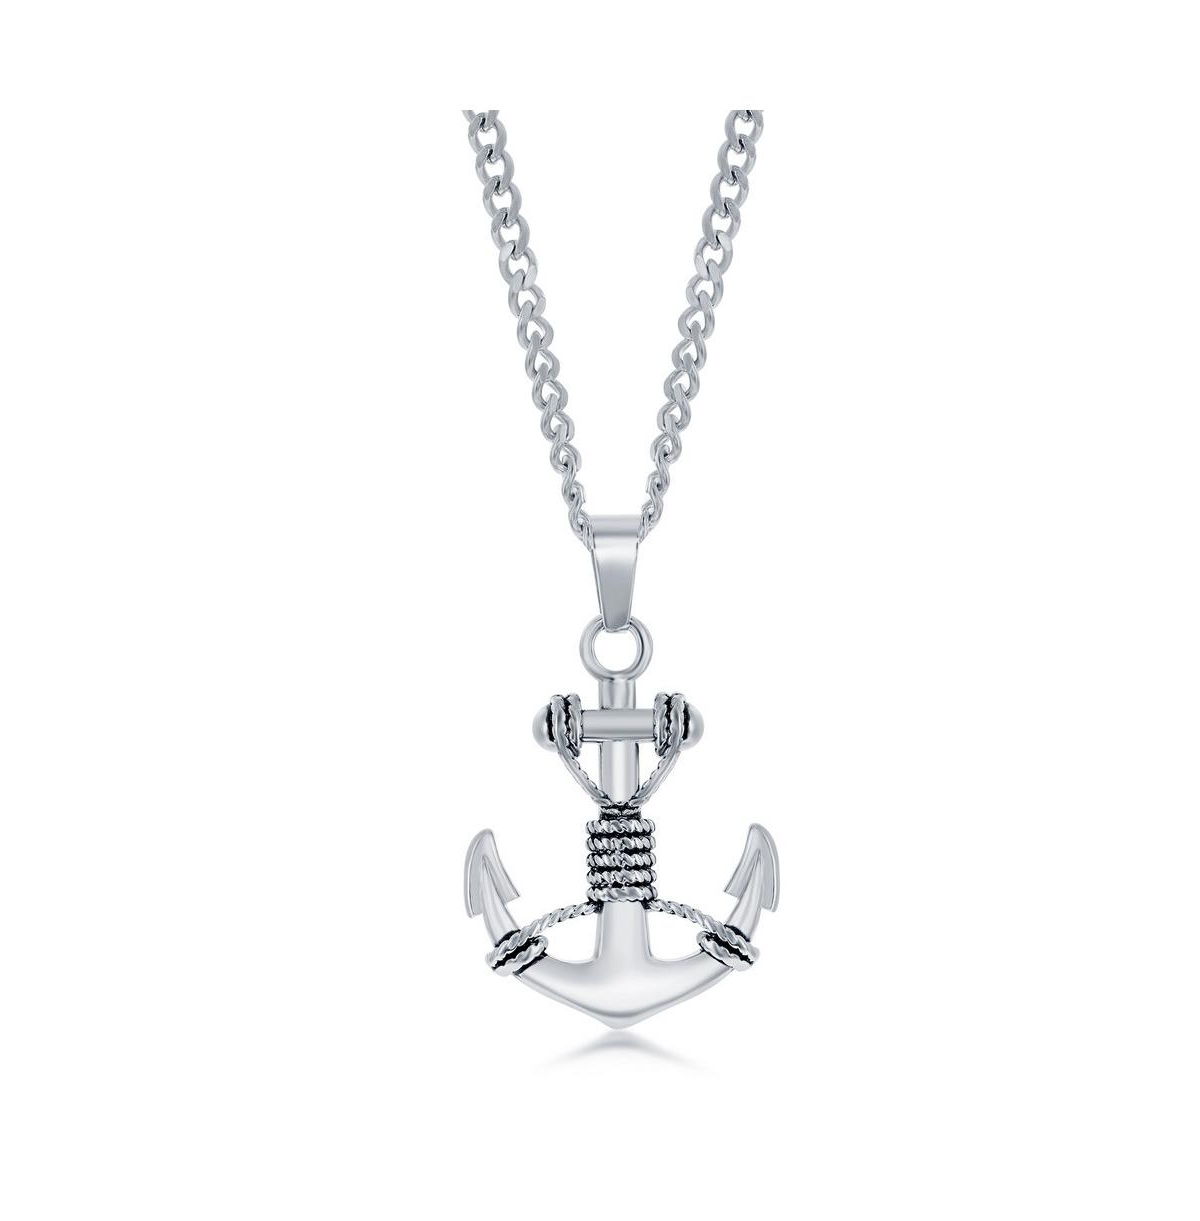 BLACKJACK MENS STAINLESS STEEL OXIDIZED ANCHOR NECKLACE